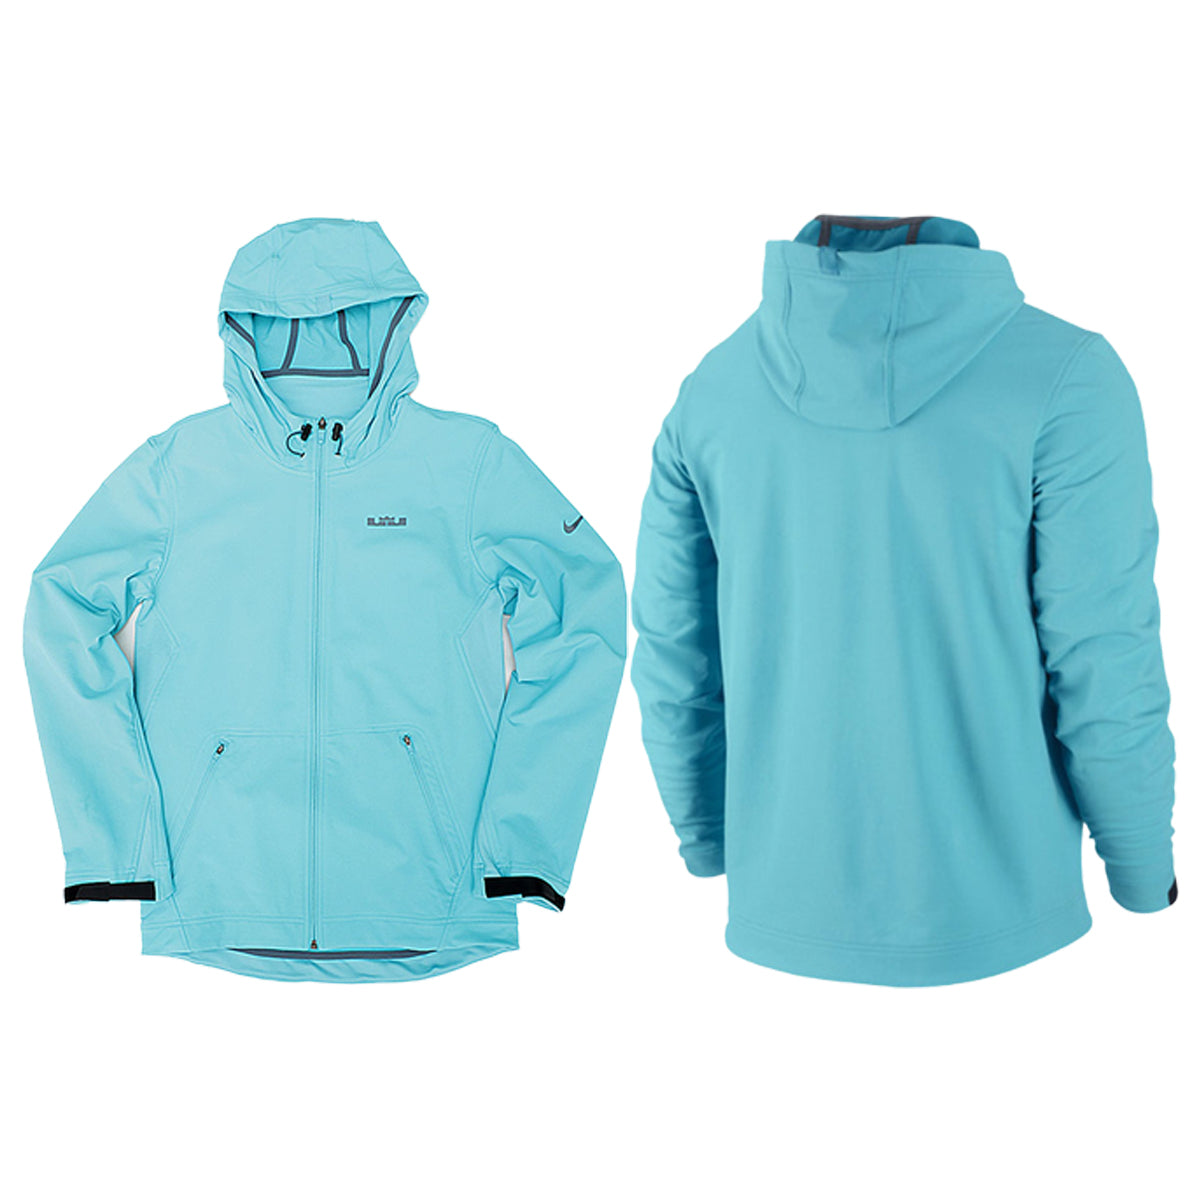 Nike Lebron James Opposition Hoodie Mens Style : 555966